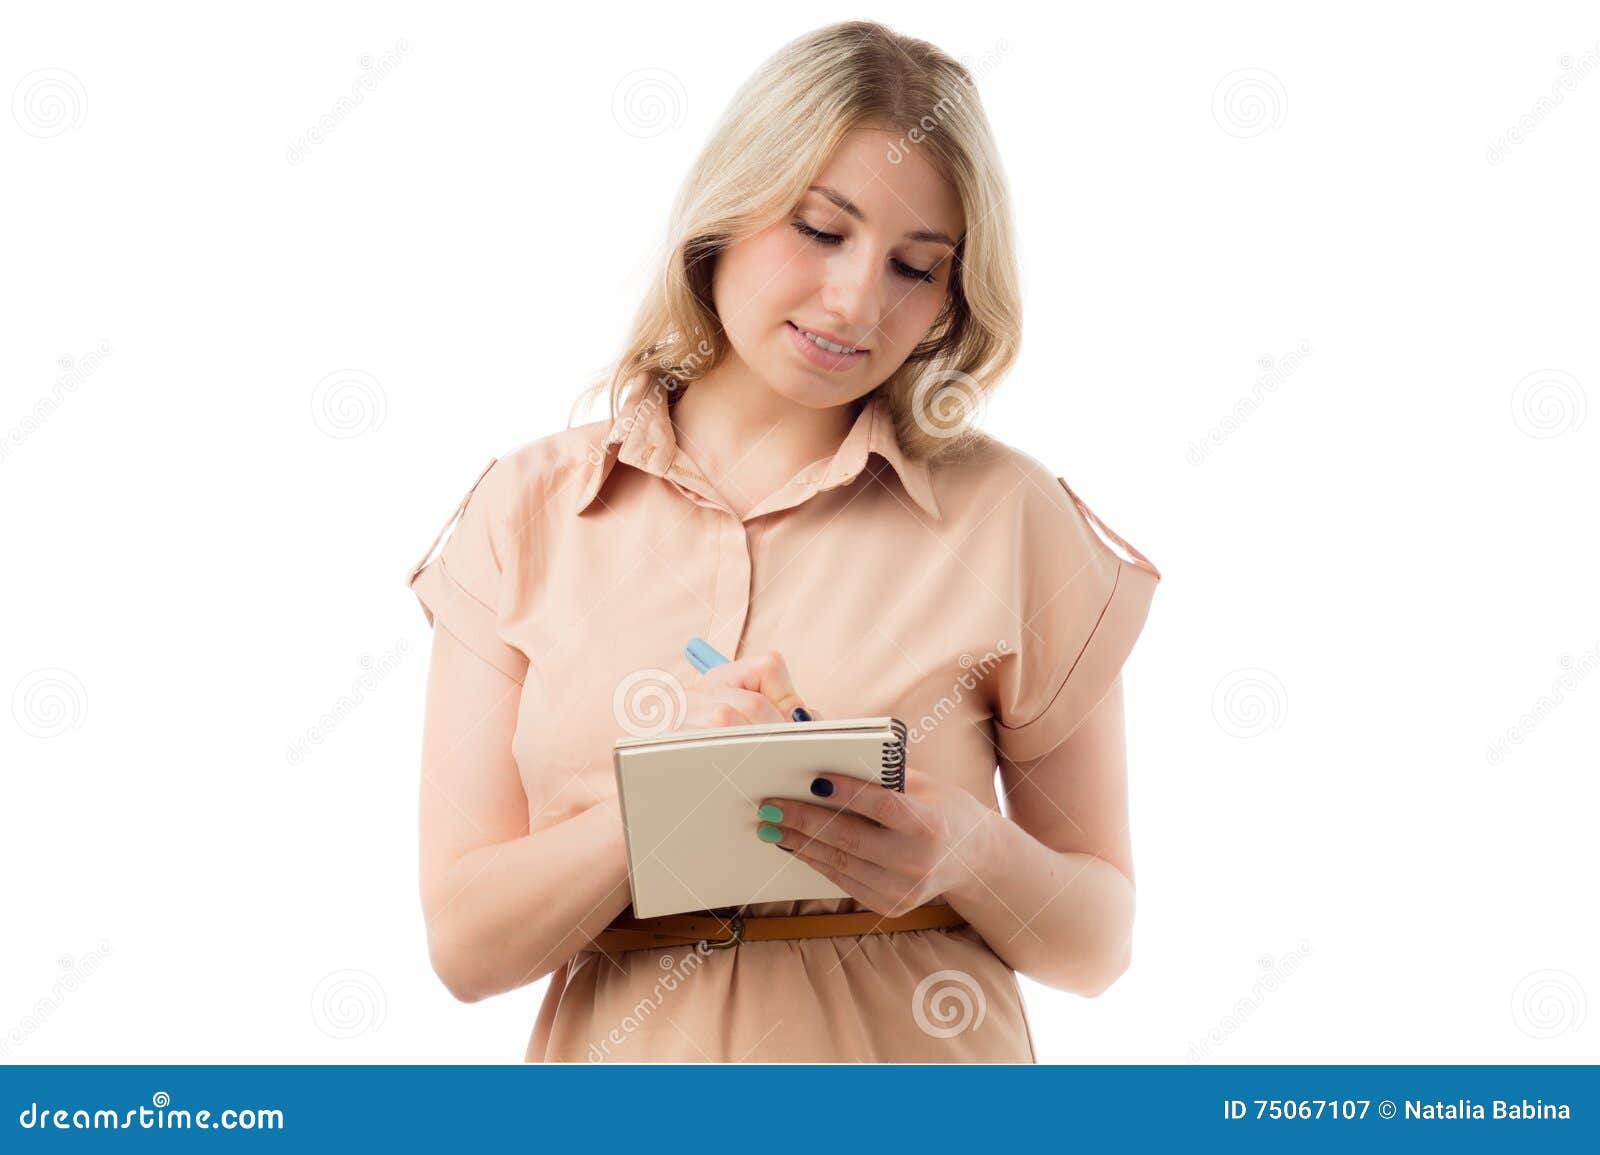 Blonde woman writing in journal - wide 8